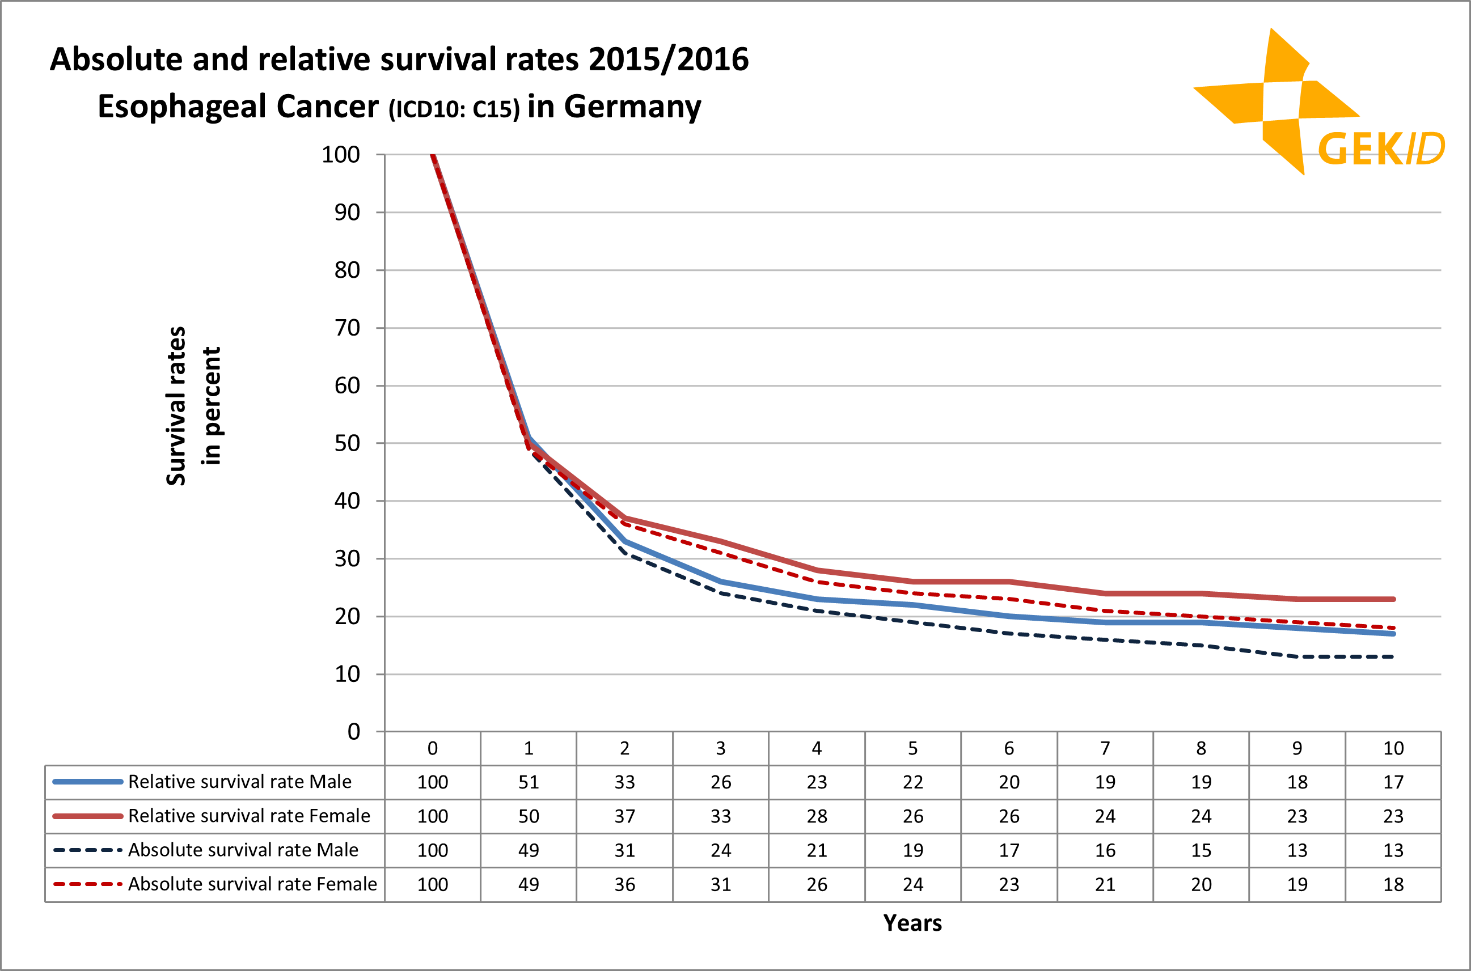 Absolute and relative survival rates of esophageal cancer (ICD 10: C15)